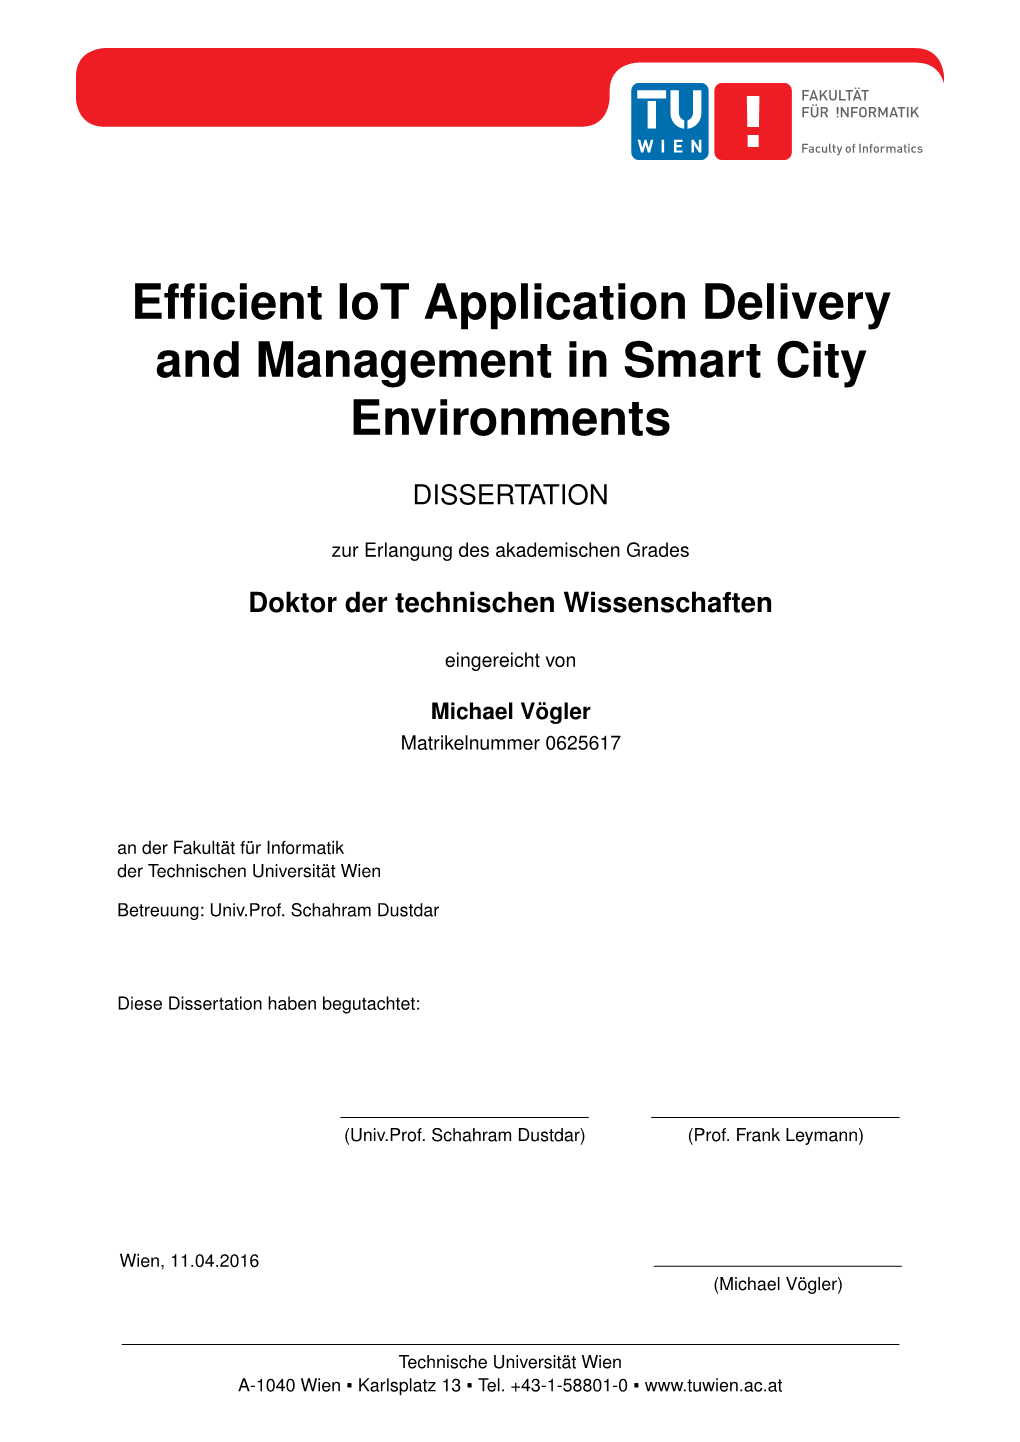 Efficient Iot Application Delivery and Management in Smart City